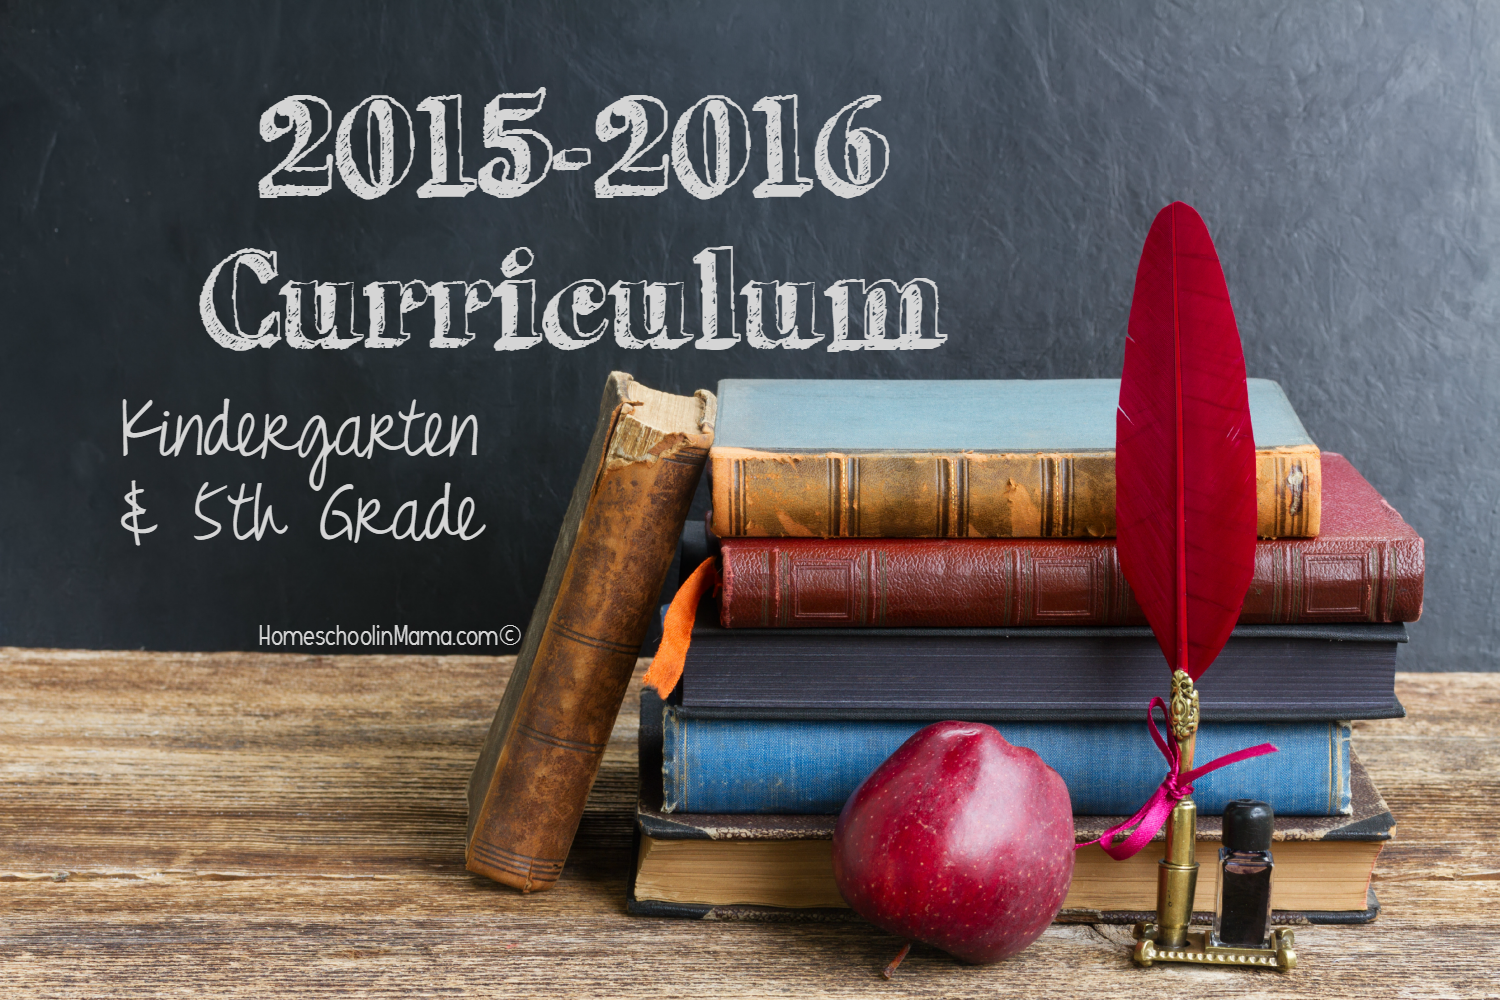 Our Curriculum for 2015-2016 Homeschool Year